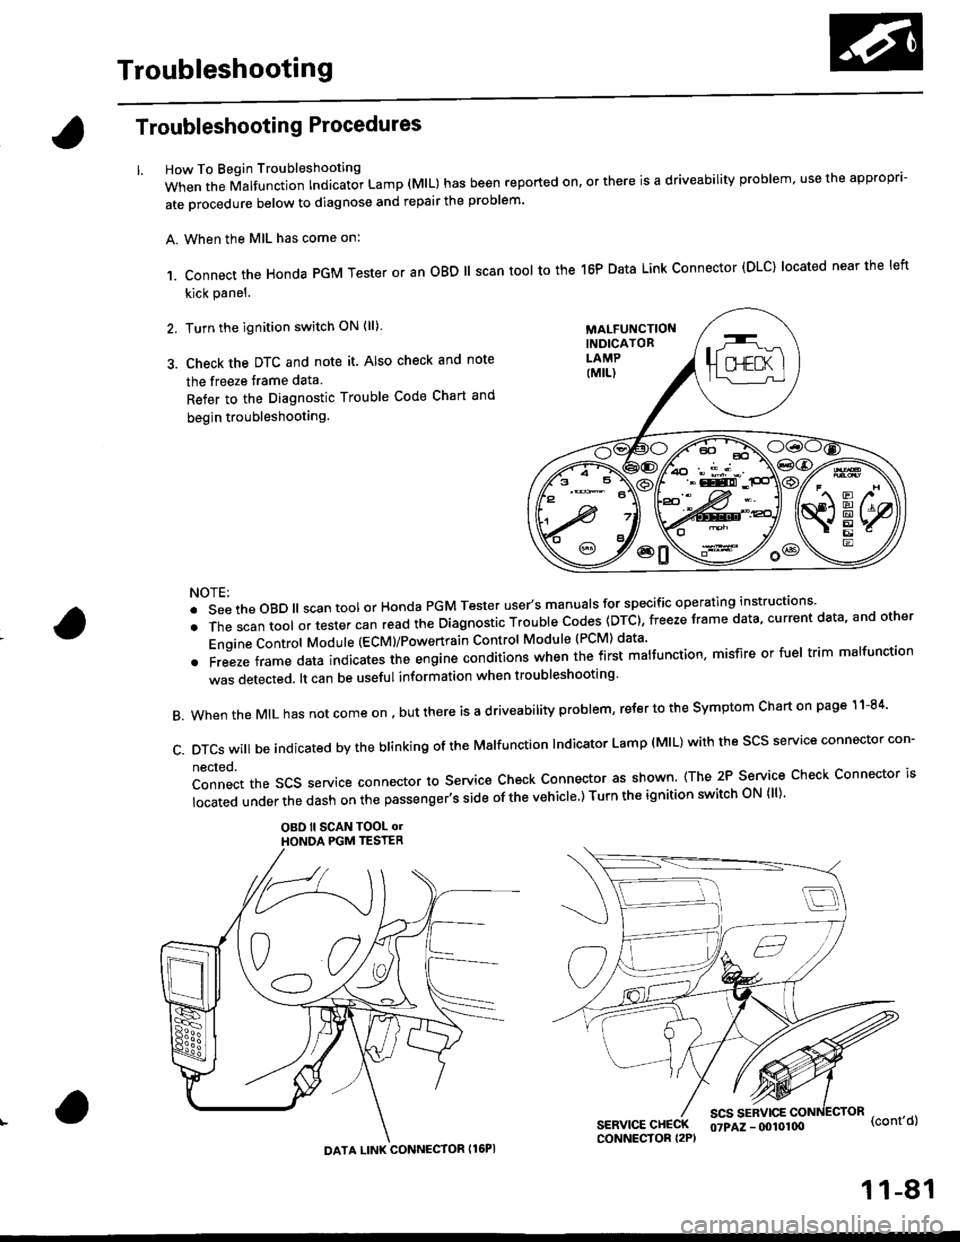 HONDA CIVIC 1996 6.G Workshop Manual Troubleshooting
Troubleshooting Procedures
How To Begin Troubleshooting
When the Malfunction Indicator Lamp (MlL) has been reported on, or there is a driveability problem, use the appropr-
ate oroced